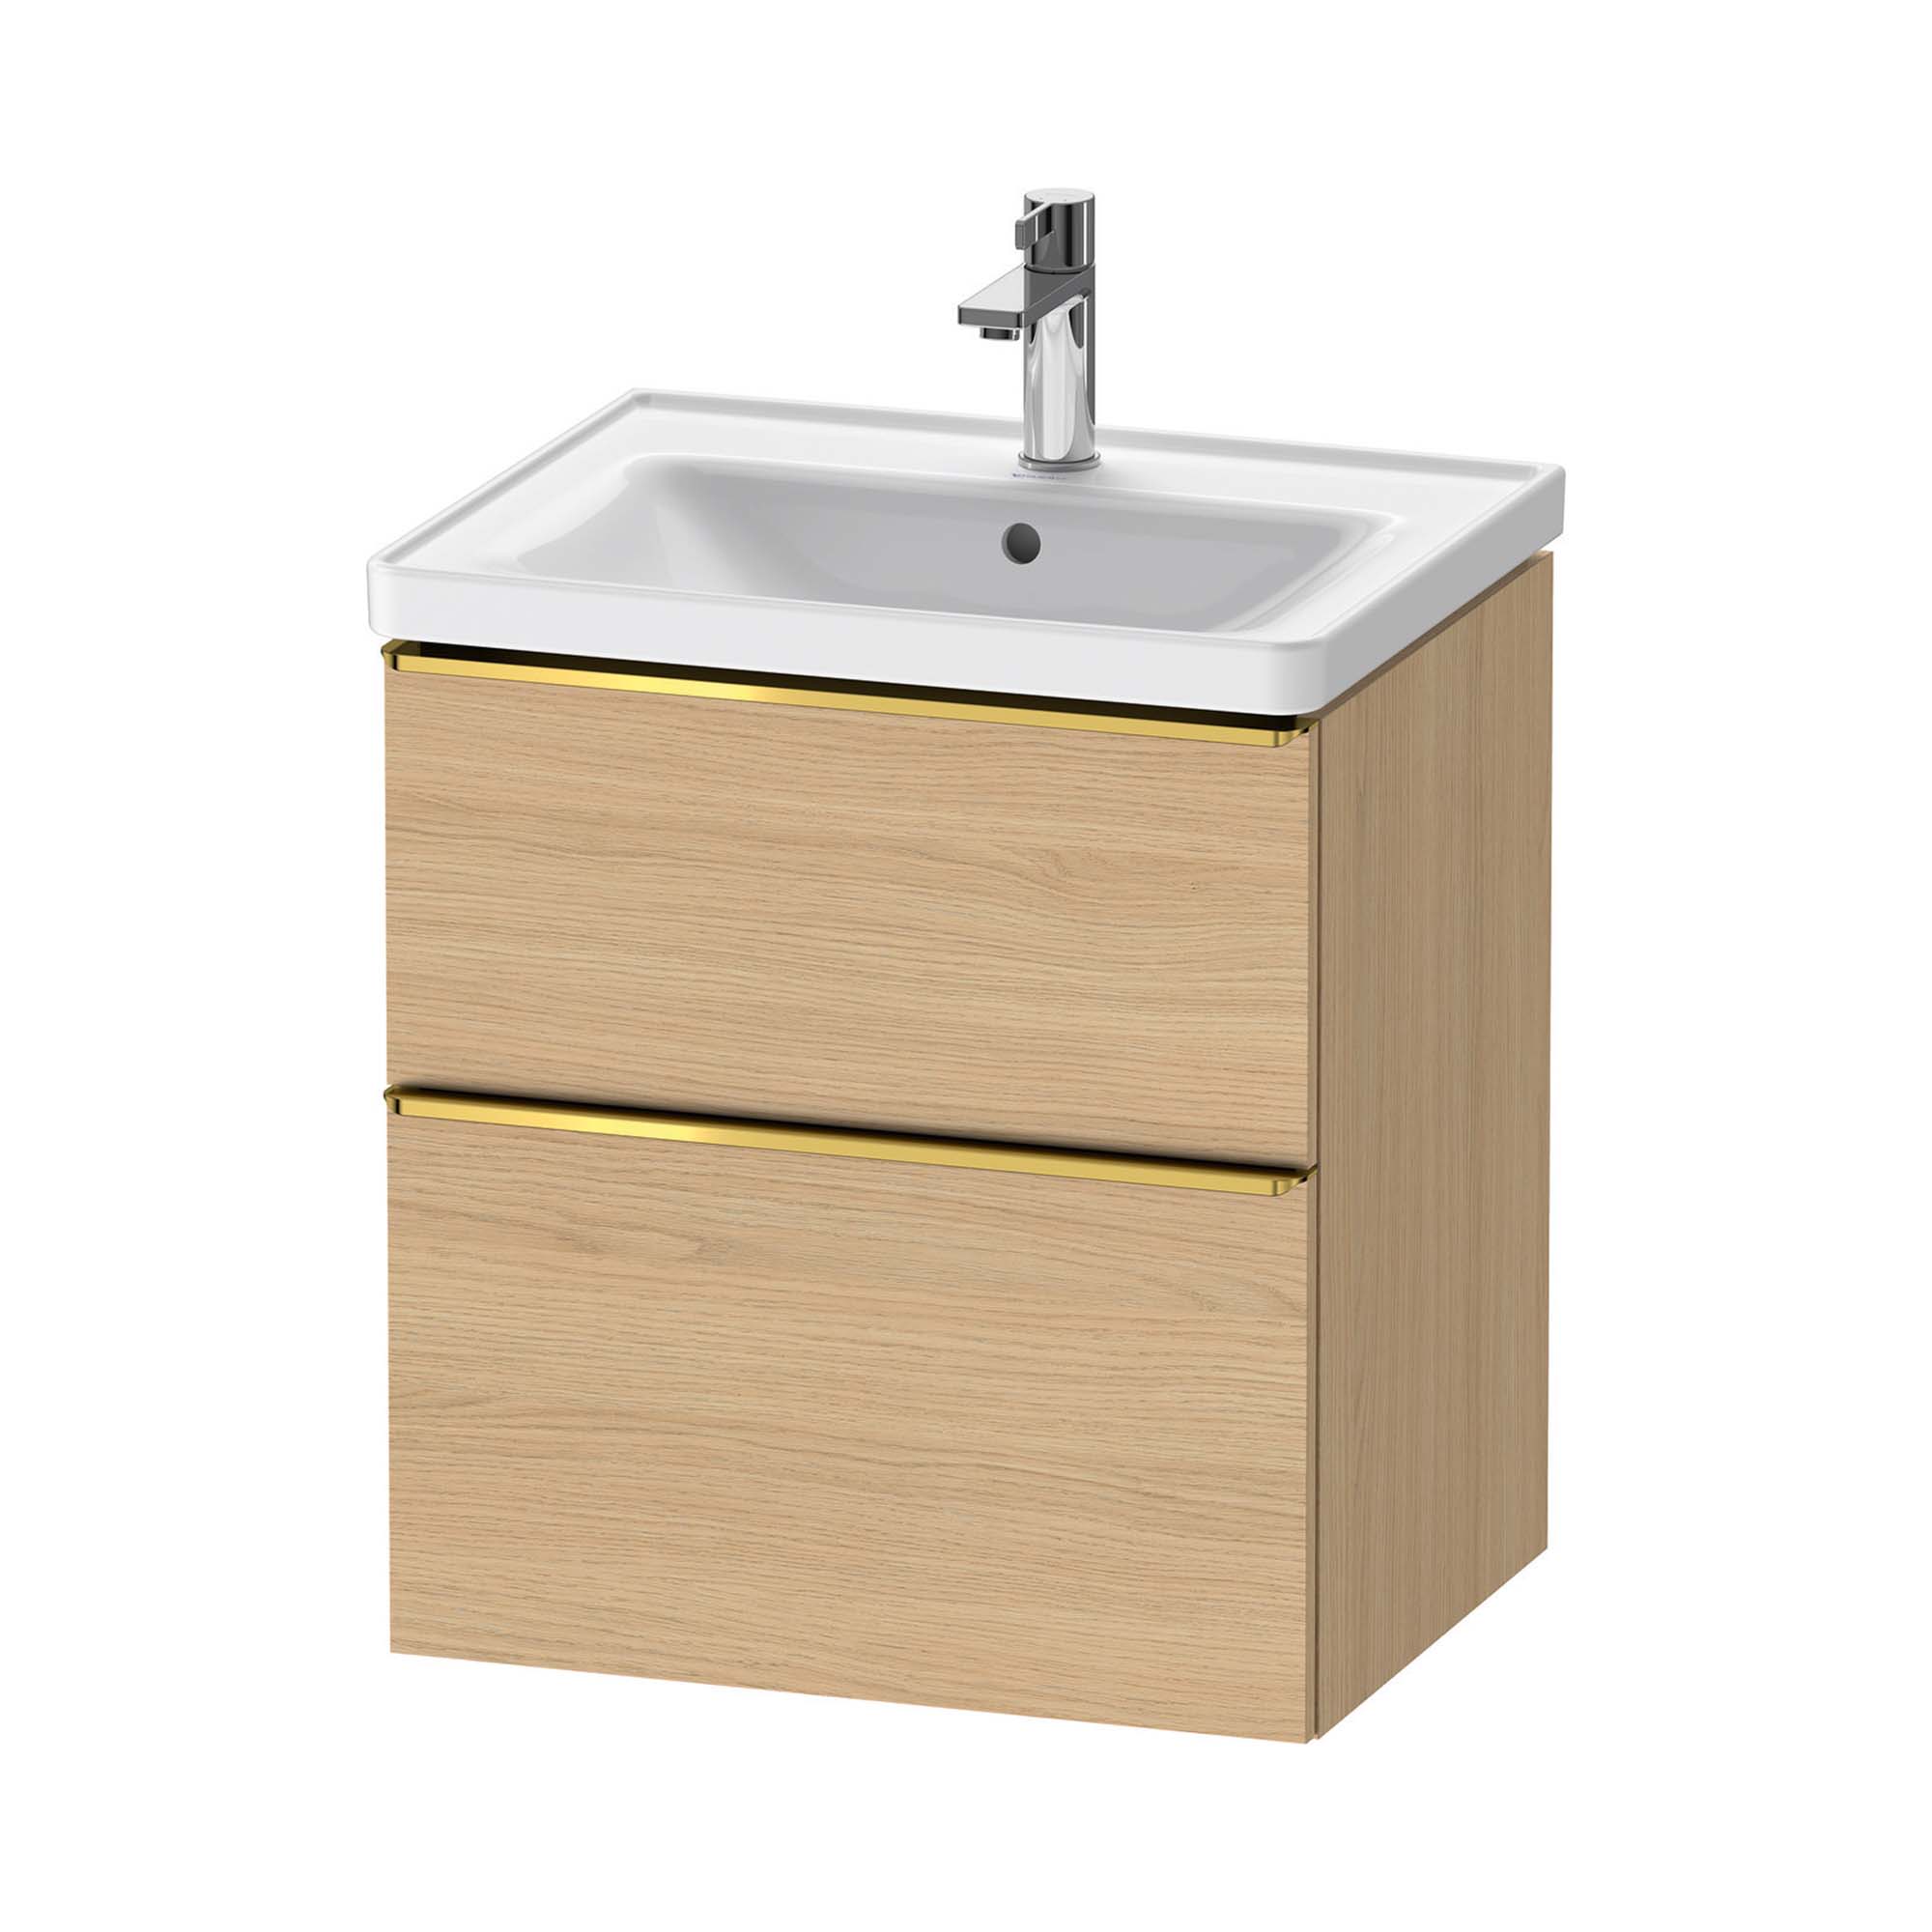 duravit d-neo 600 wall mounted vanity unit with d-neo basin natural oak gold handles